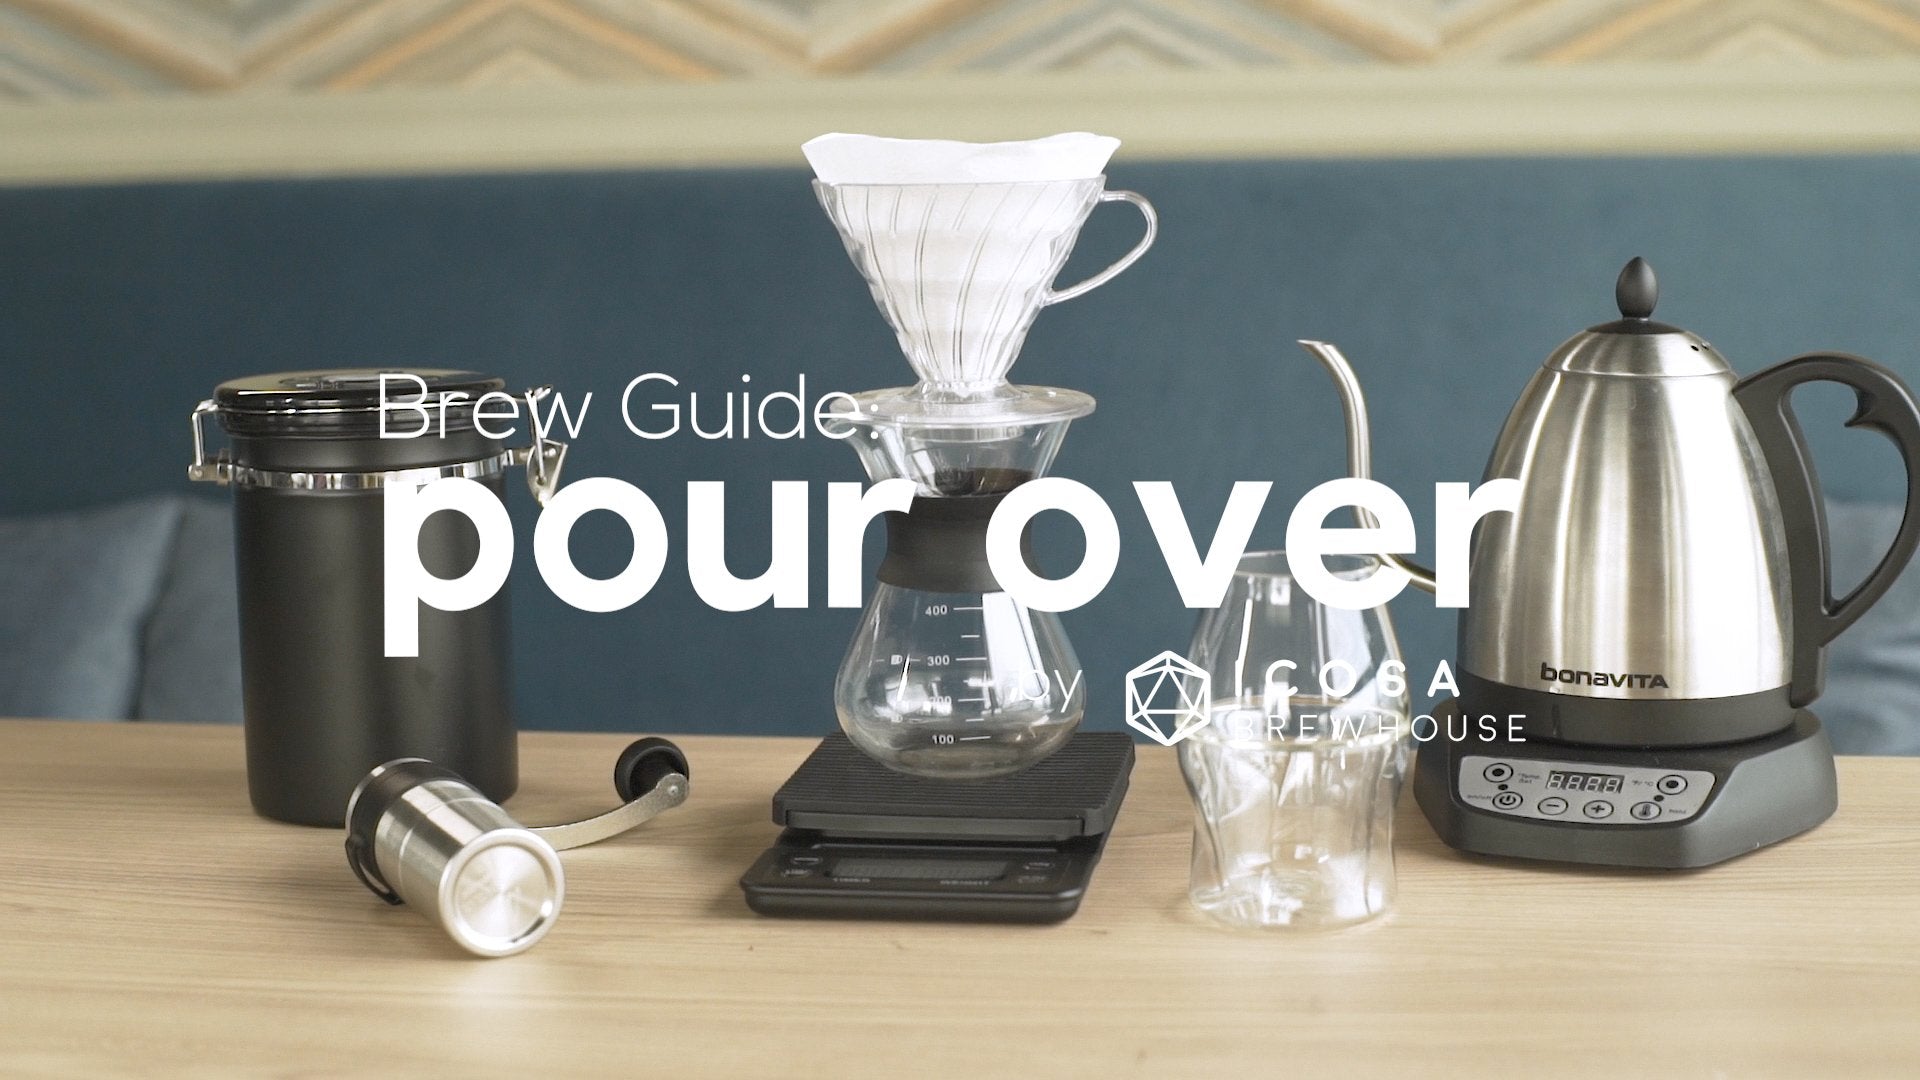 Brew Guide - Pour Over